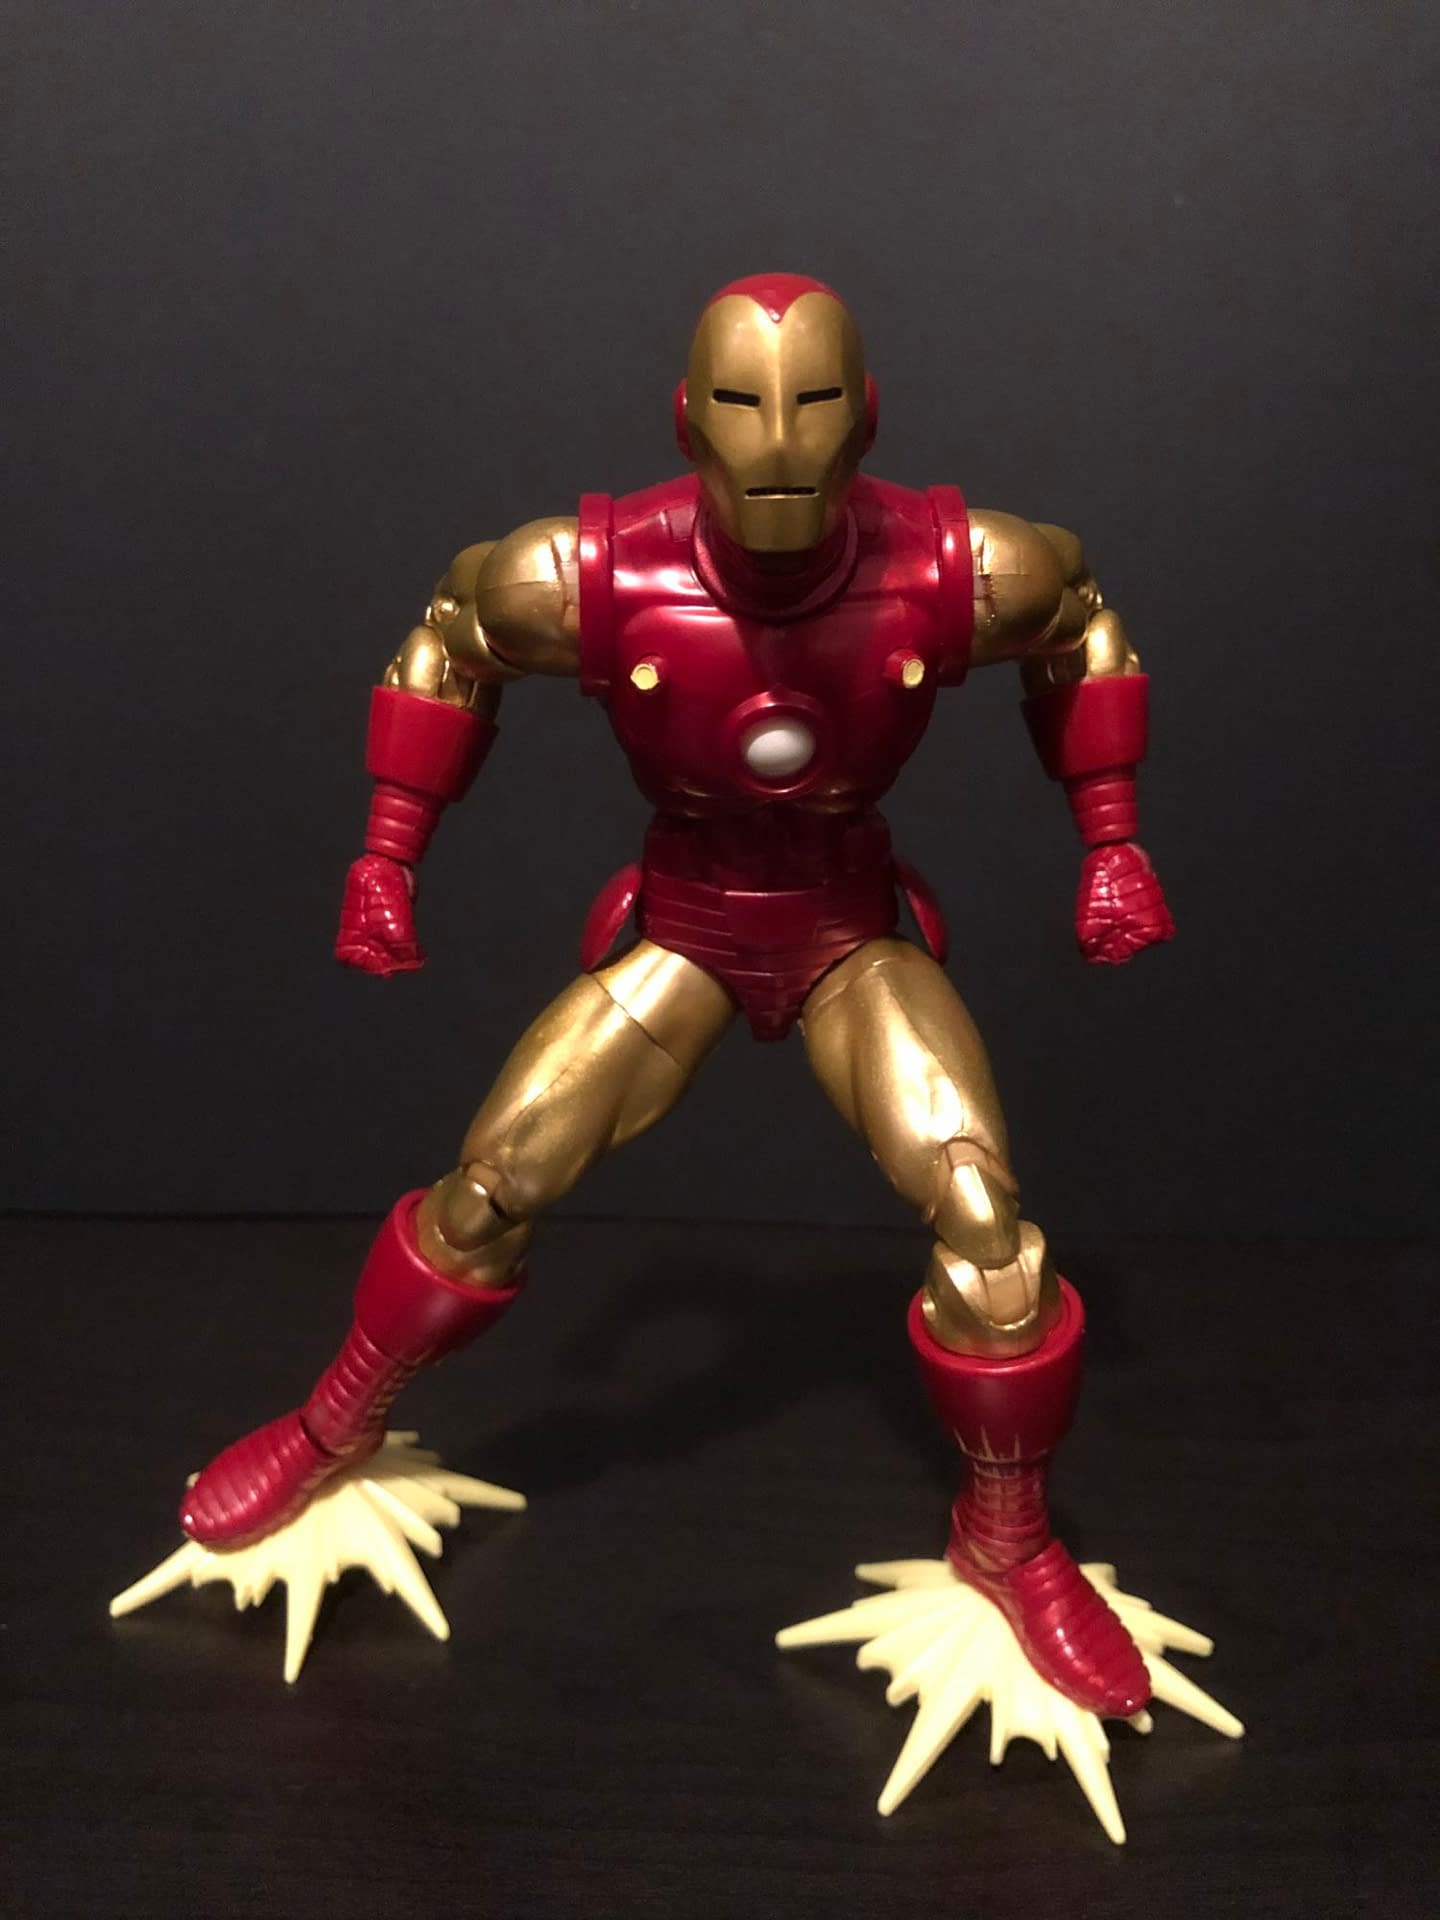 Marvel’s 80th Anniversary Iron Man Marvel Legends Figure [REVIEW]